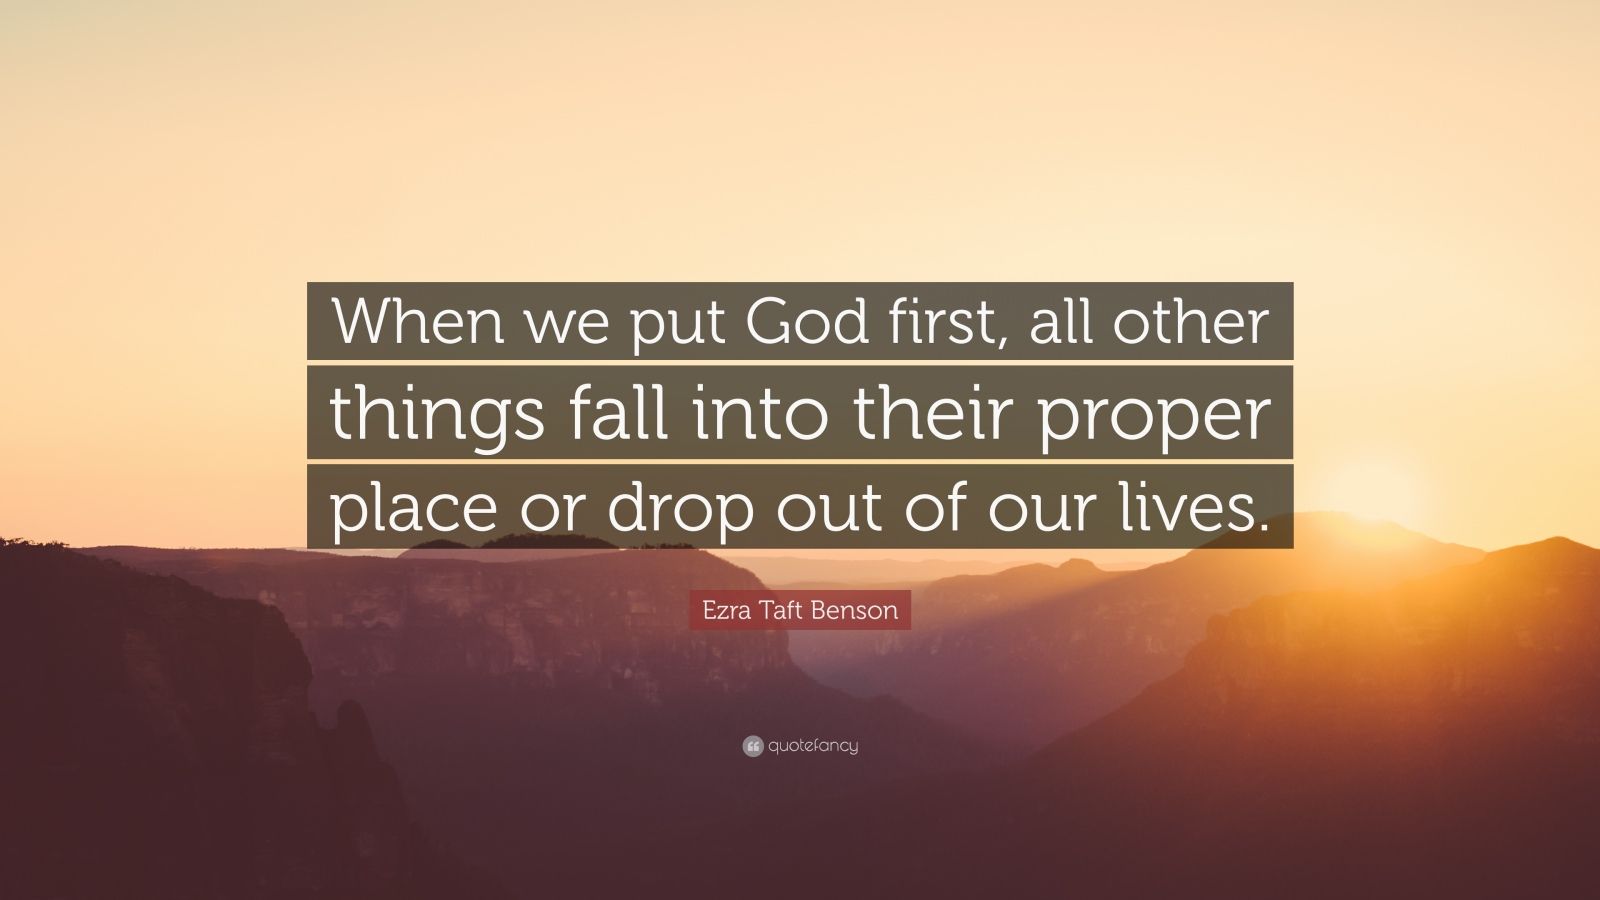 Ezra Taft Benson Quote: “When we put God first, all other things fall ...